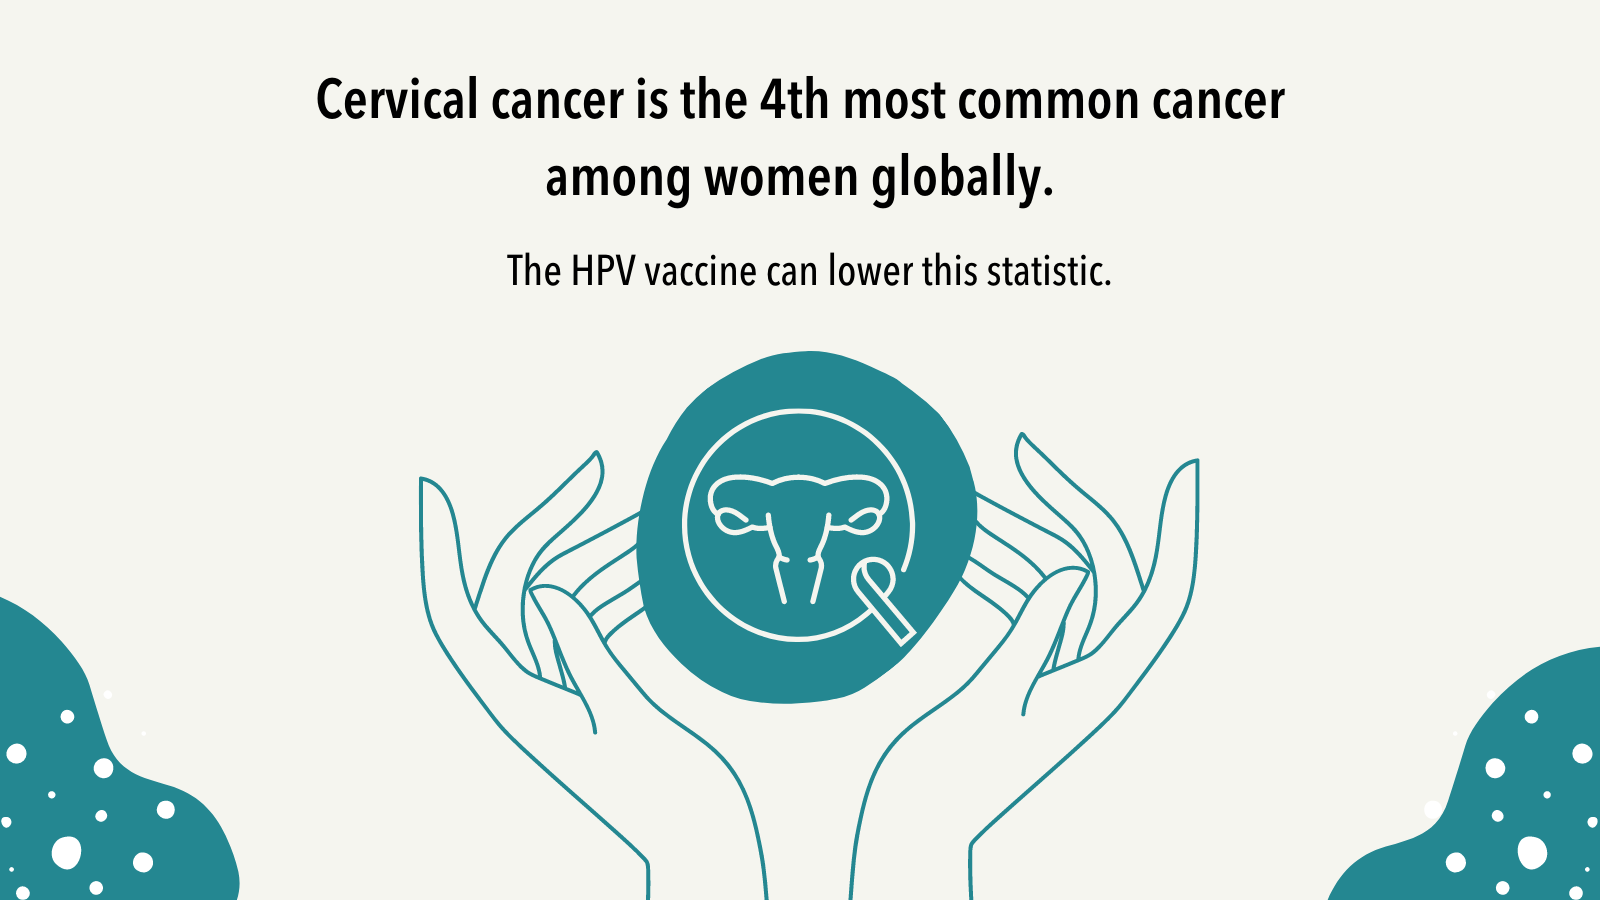 Image of hands holding a globe with cervical cancer symbol. Text overlay reads that cervical cancer is the most common cancer among women globally. The HPV vaccine can lower this statistic. 